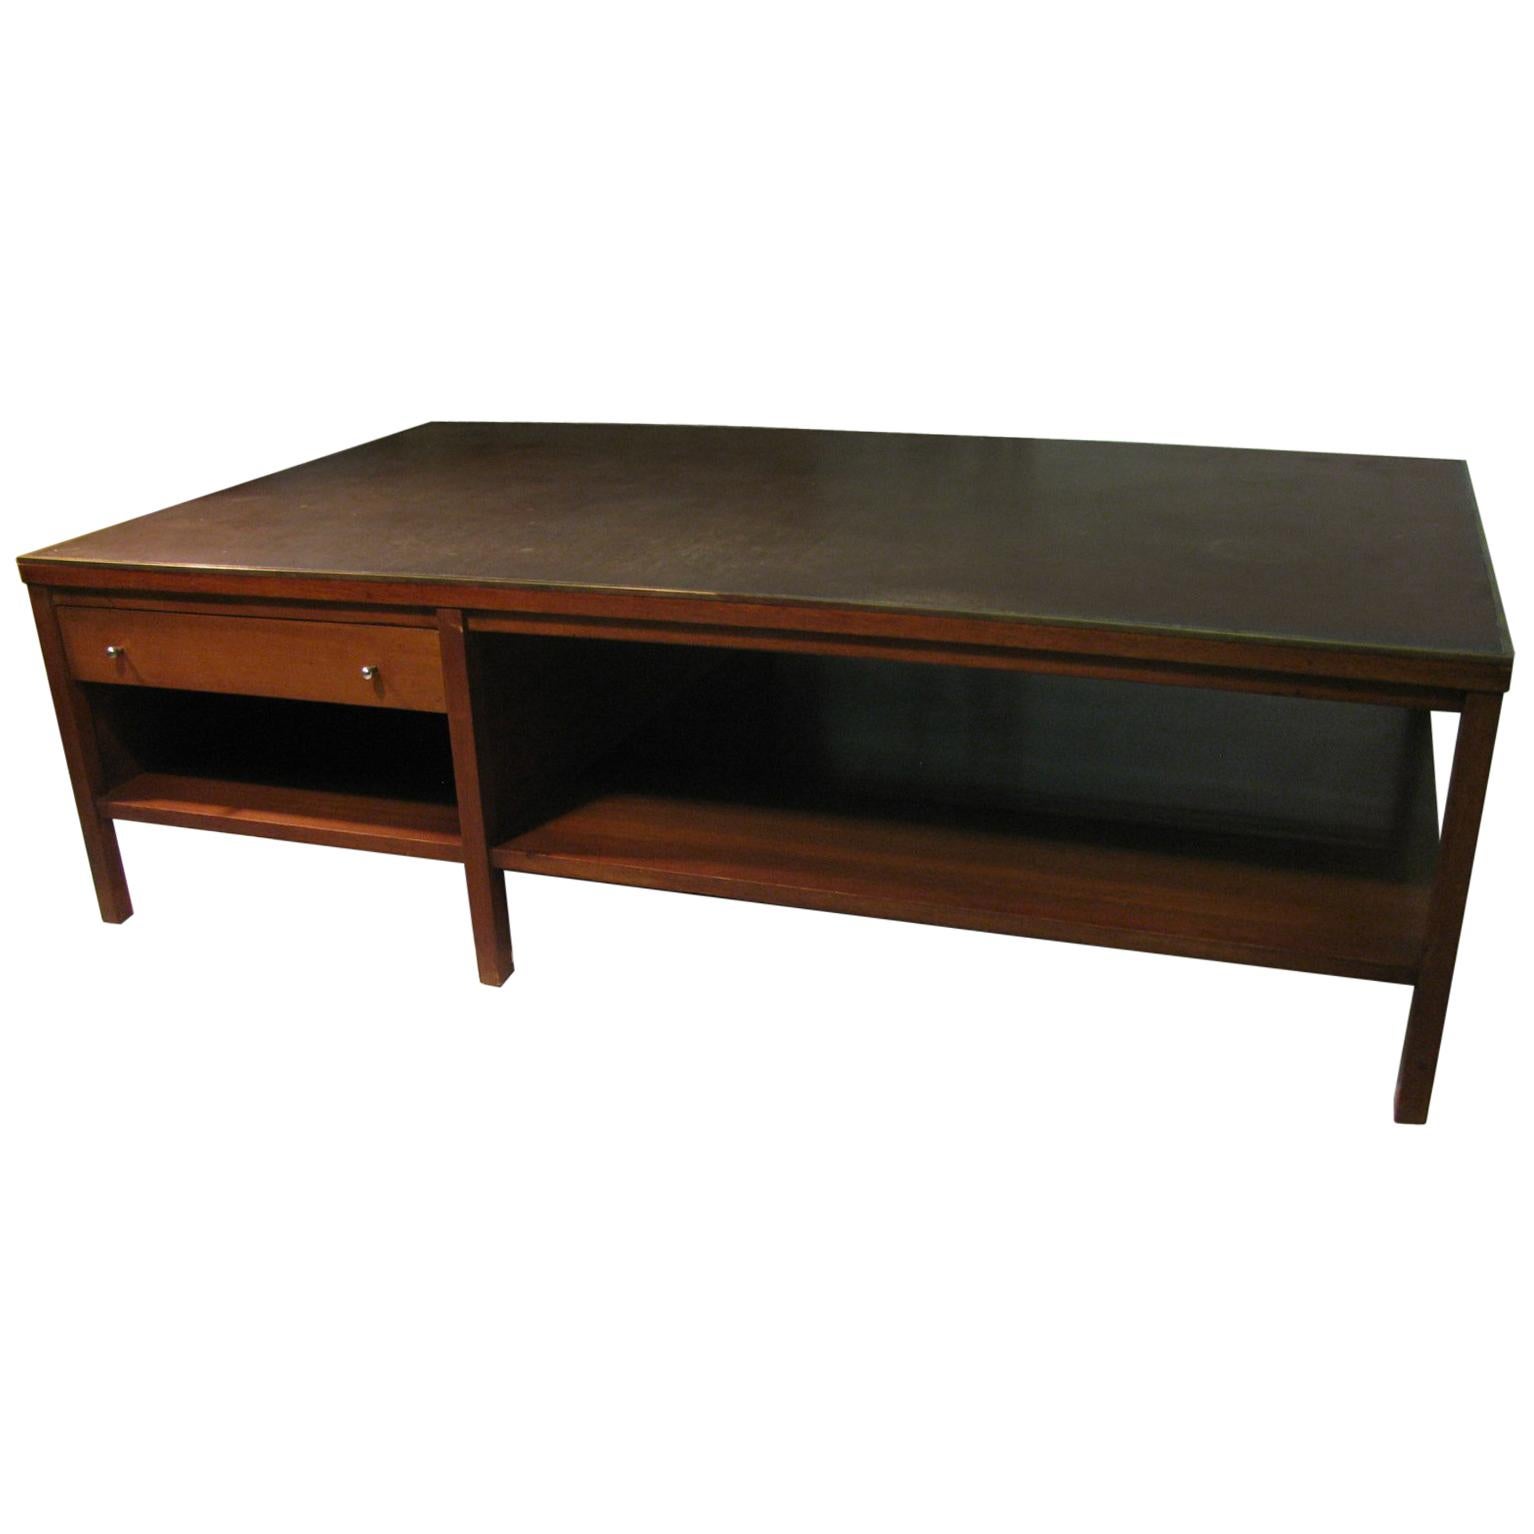 Paul McCobb Mid-Century Modern Leather Top and Walnut Cocktail Table for Calvin